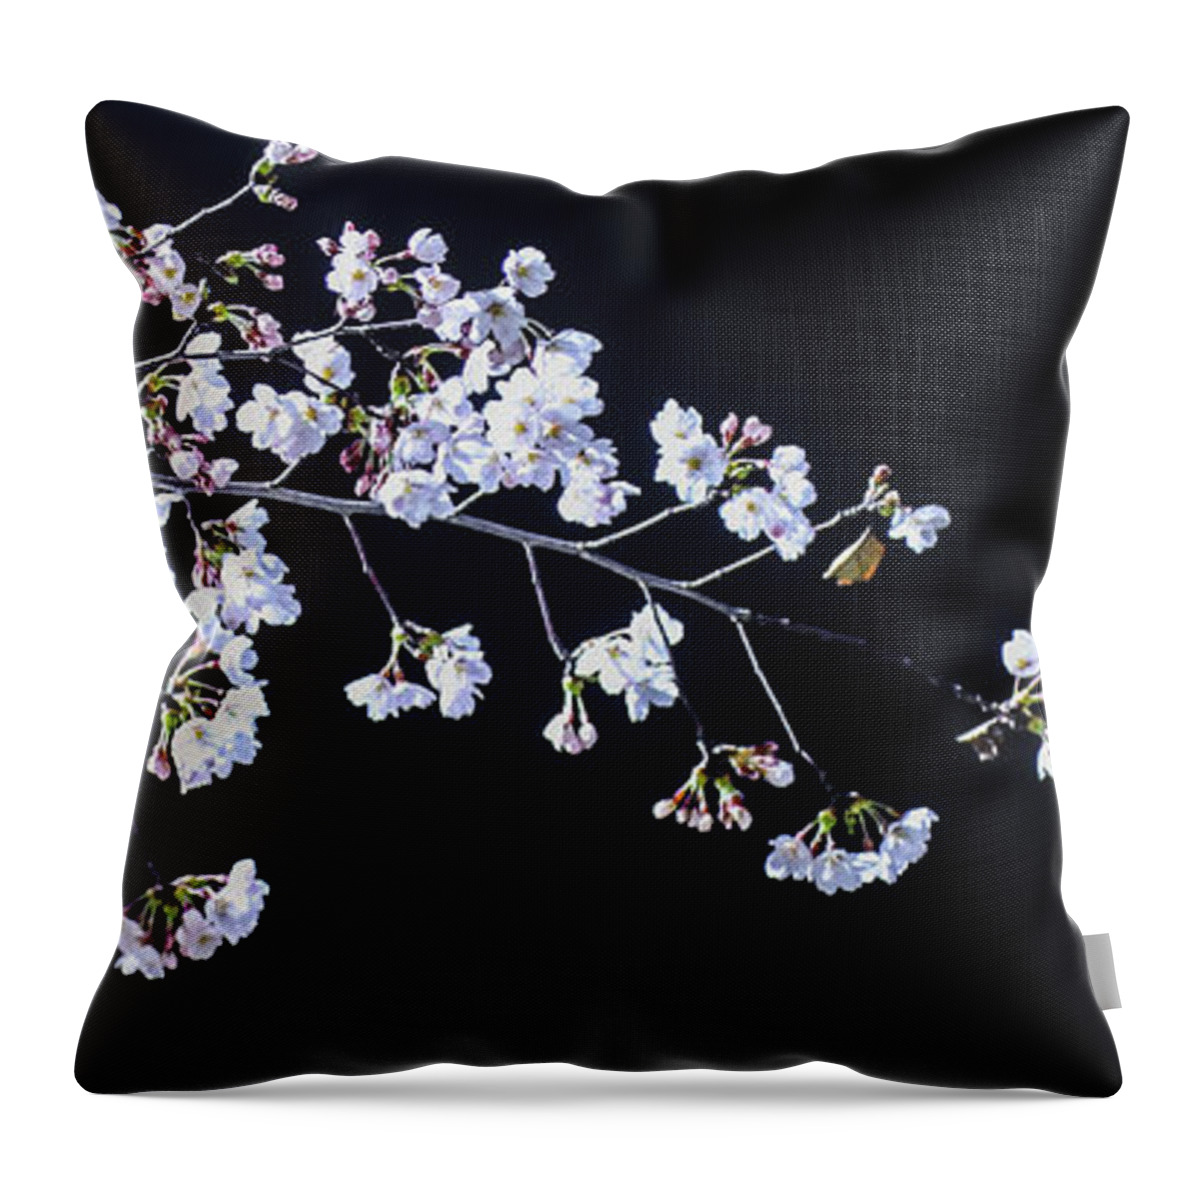 Cherry Blossom Throw Pillow featuring the photograph Flower At Night by Hyuntae Kim